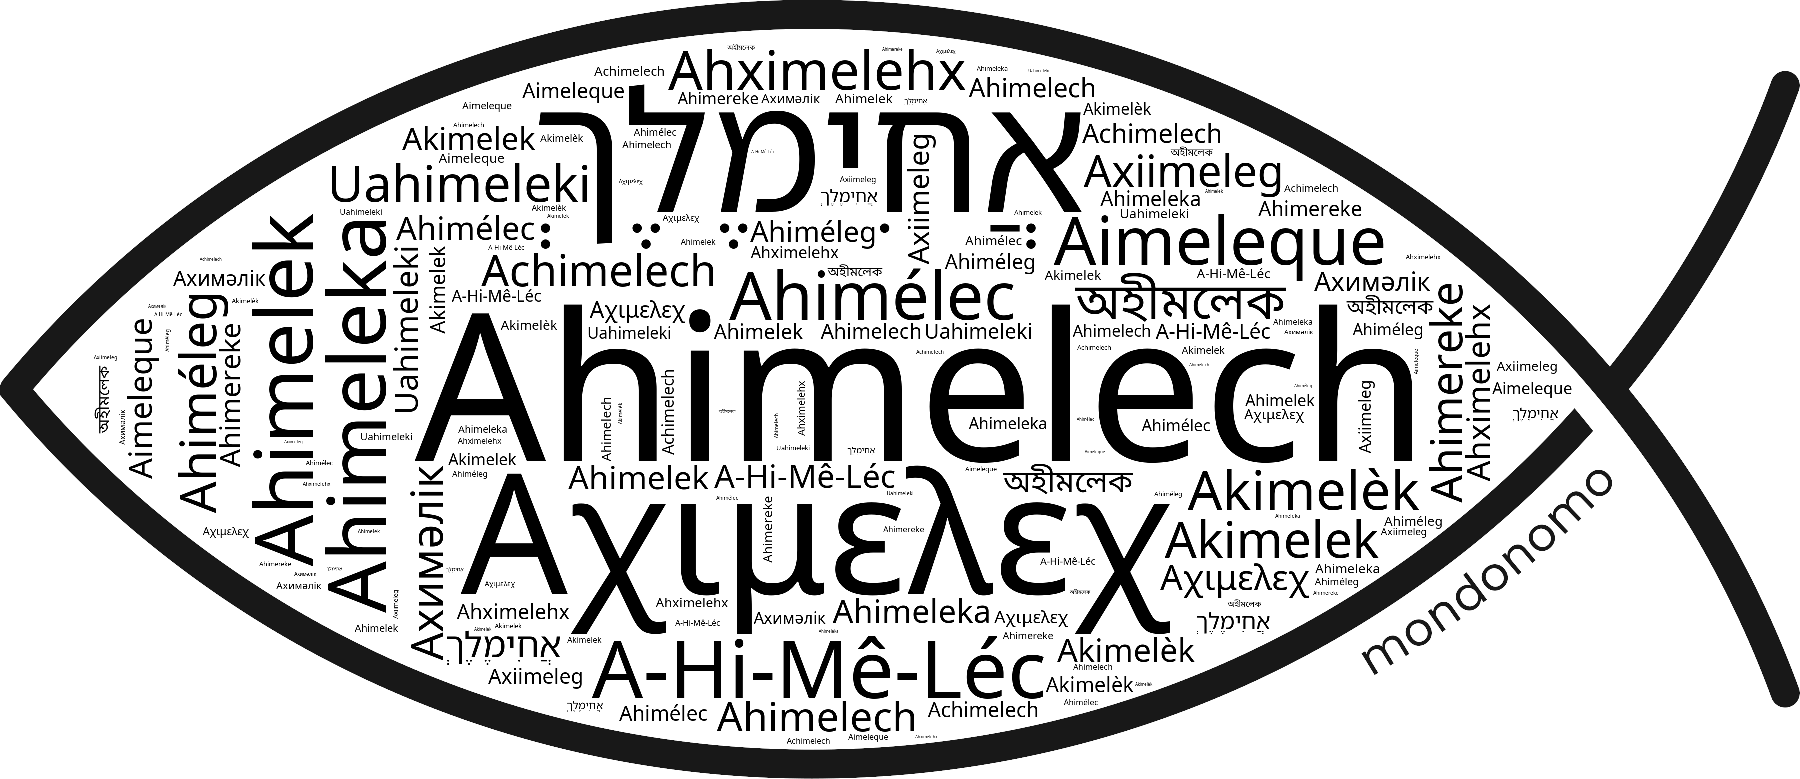 Name Ahimelech in the world's Bibles